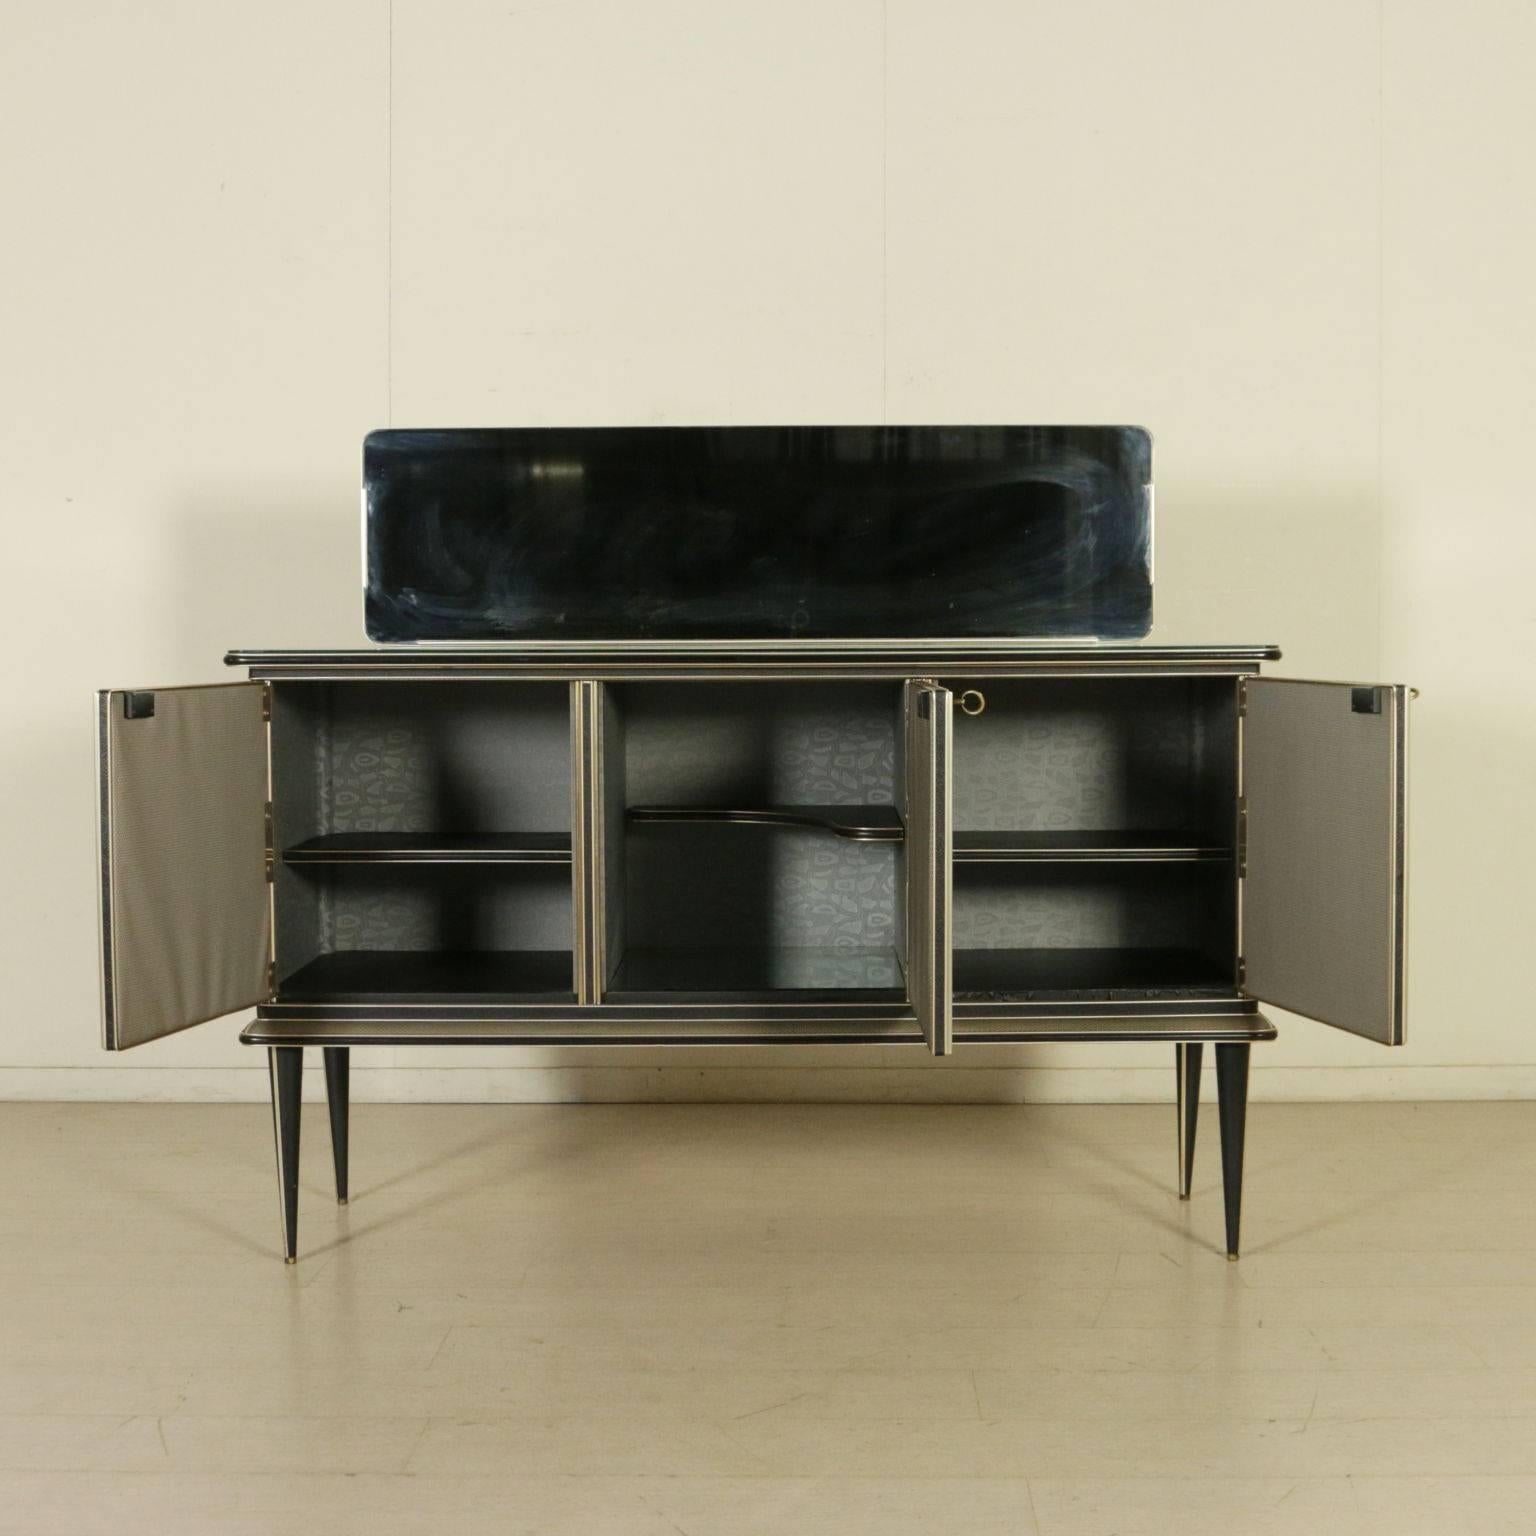 A sideboard with mirror, wooden structure covered with quilted skai, decorated glasses on the doors, protective glass on the top. Manufactured in Italy, 1950s.